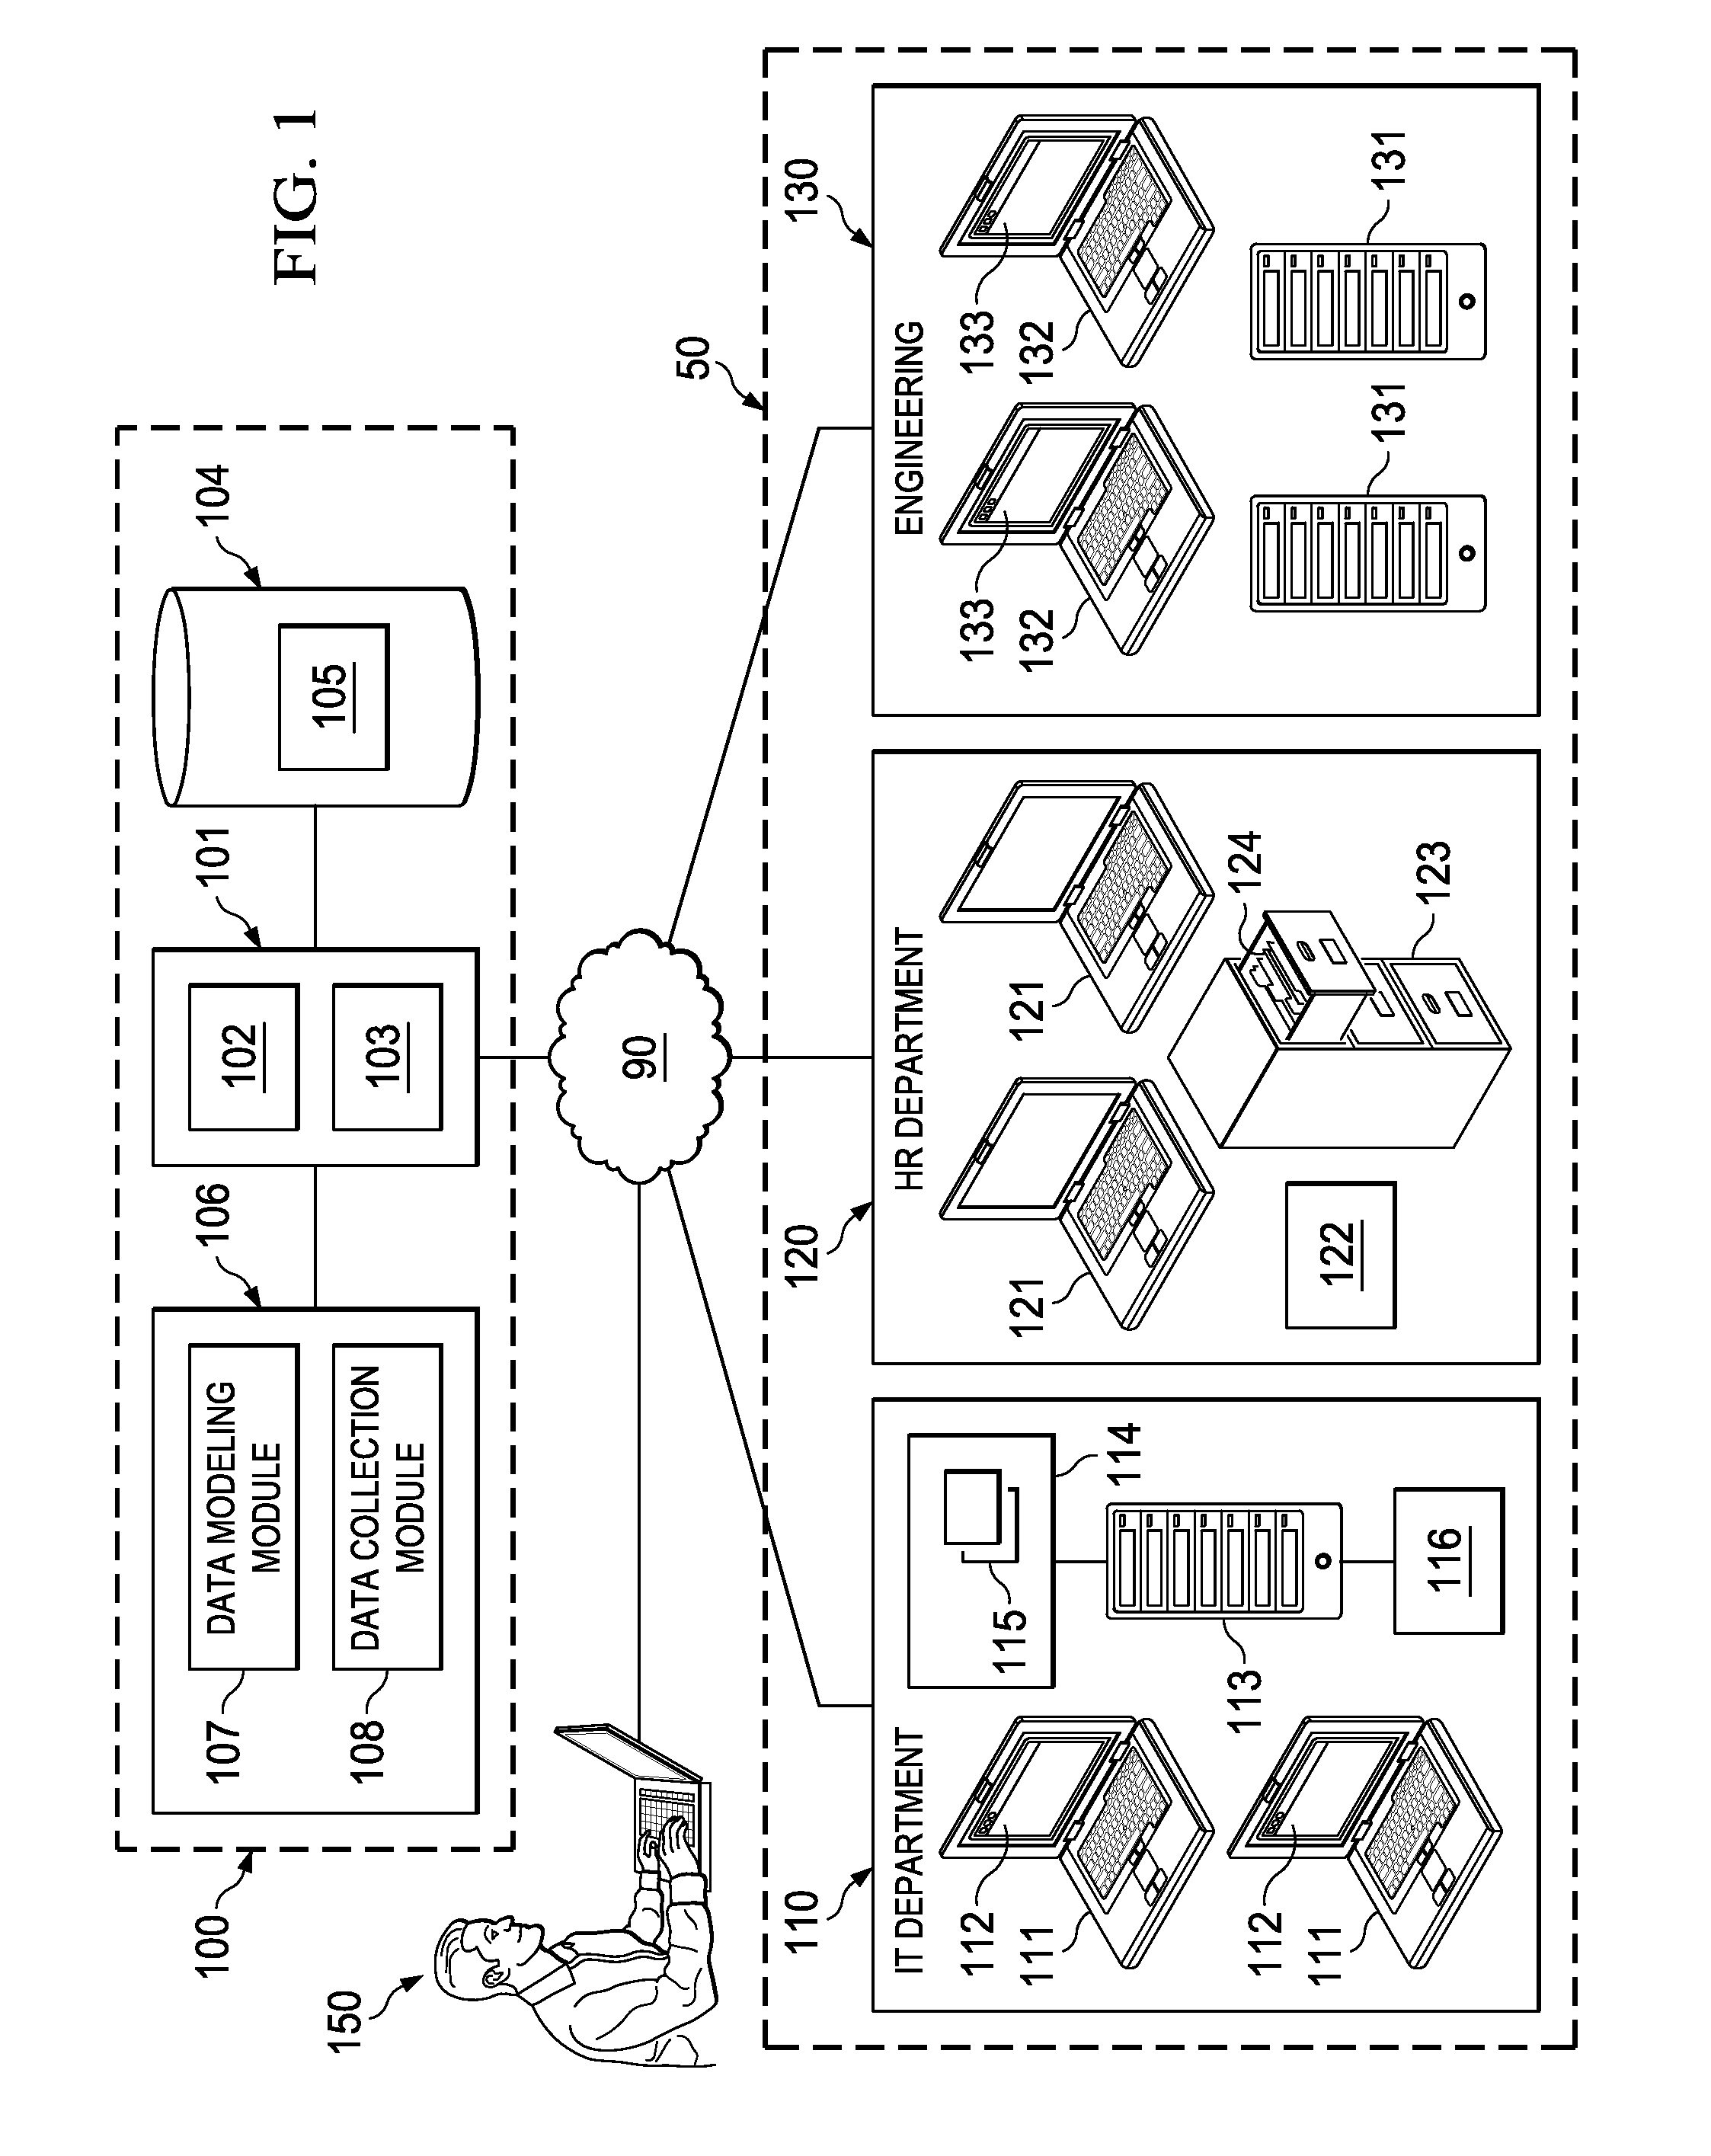 Method and system for determination of data completeness for analytic data calculations